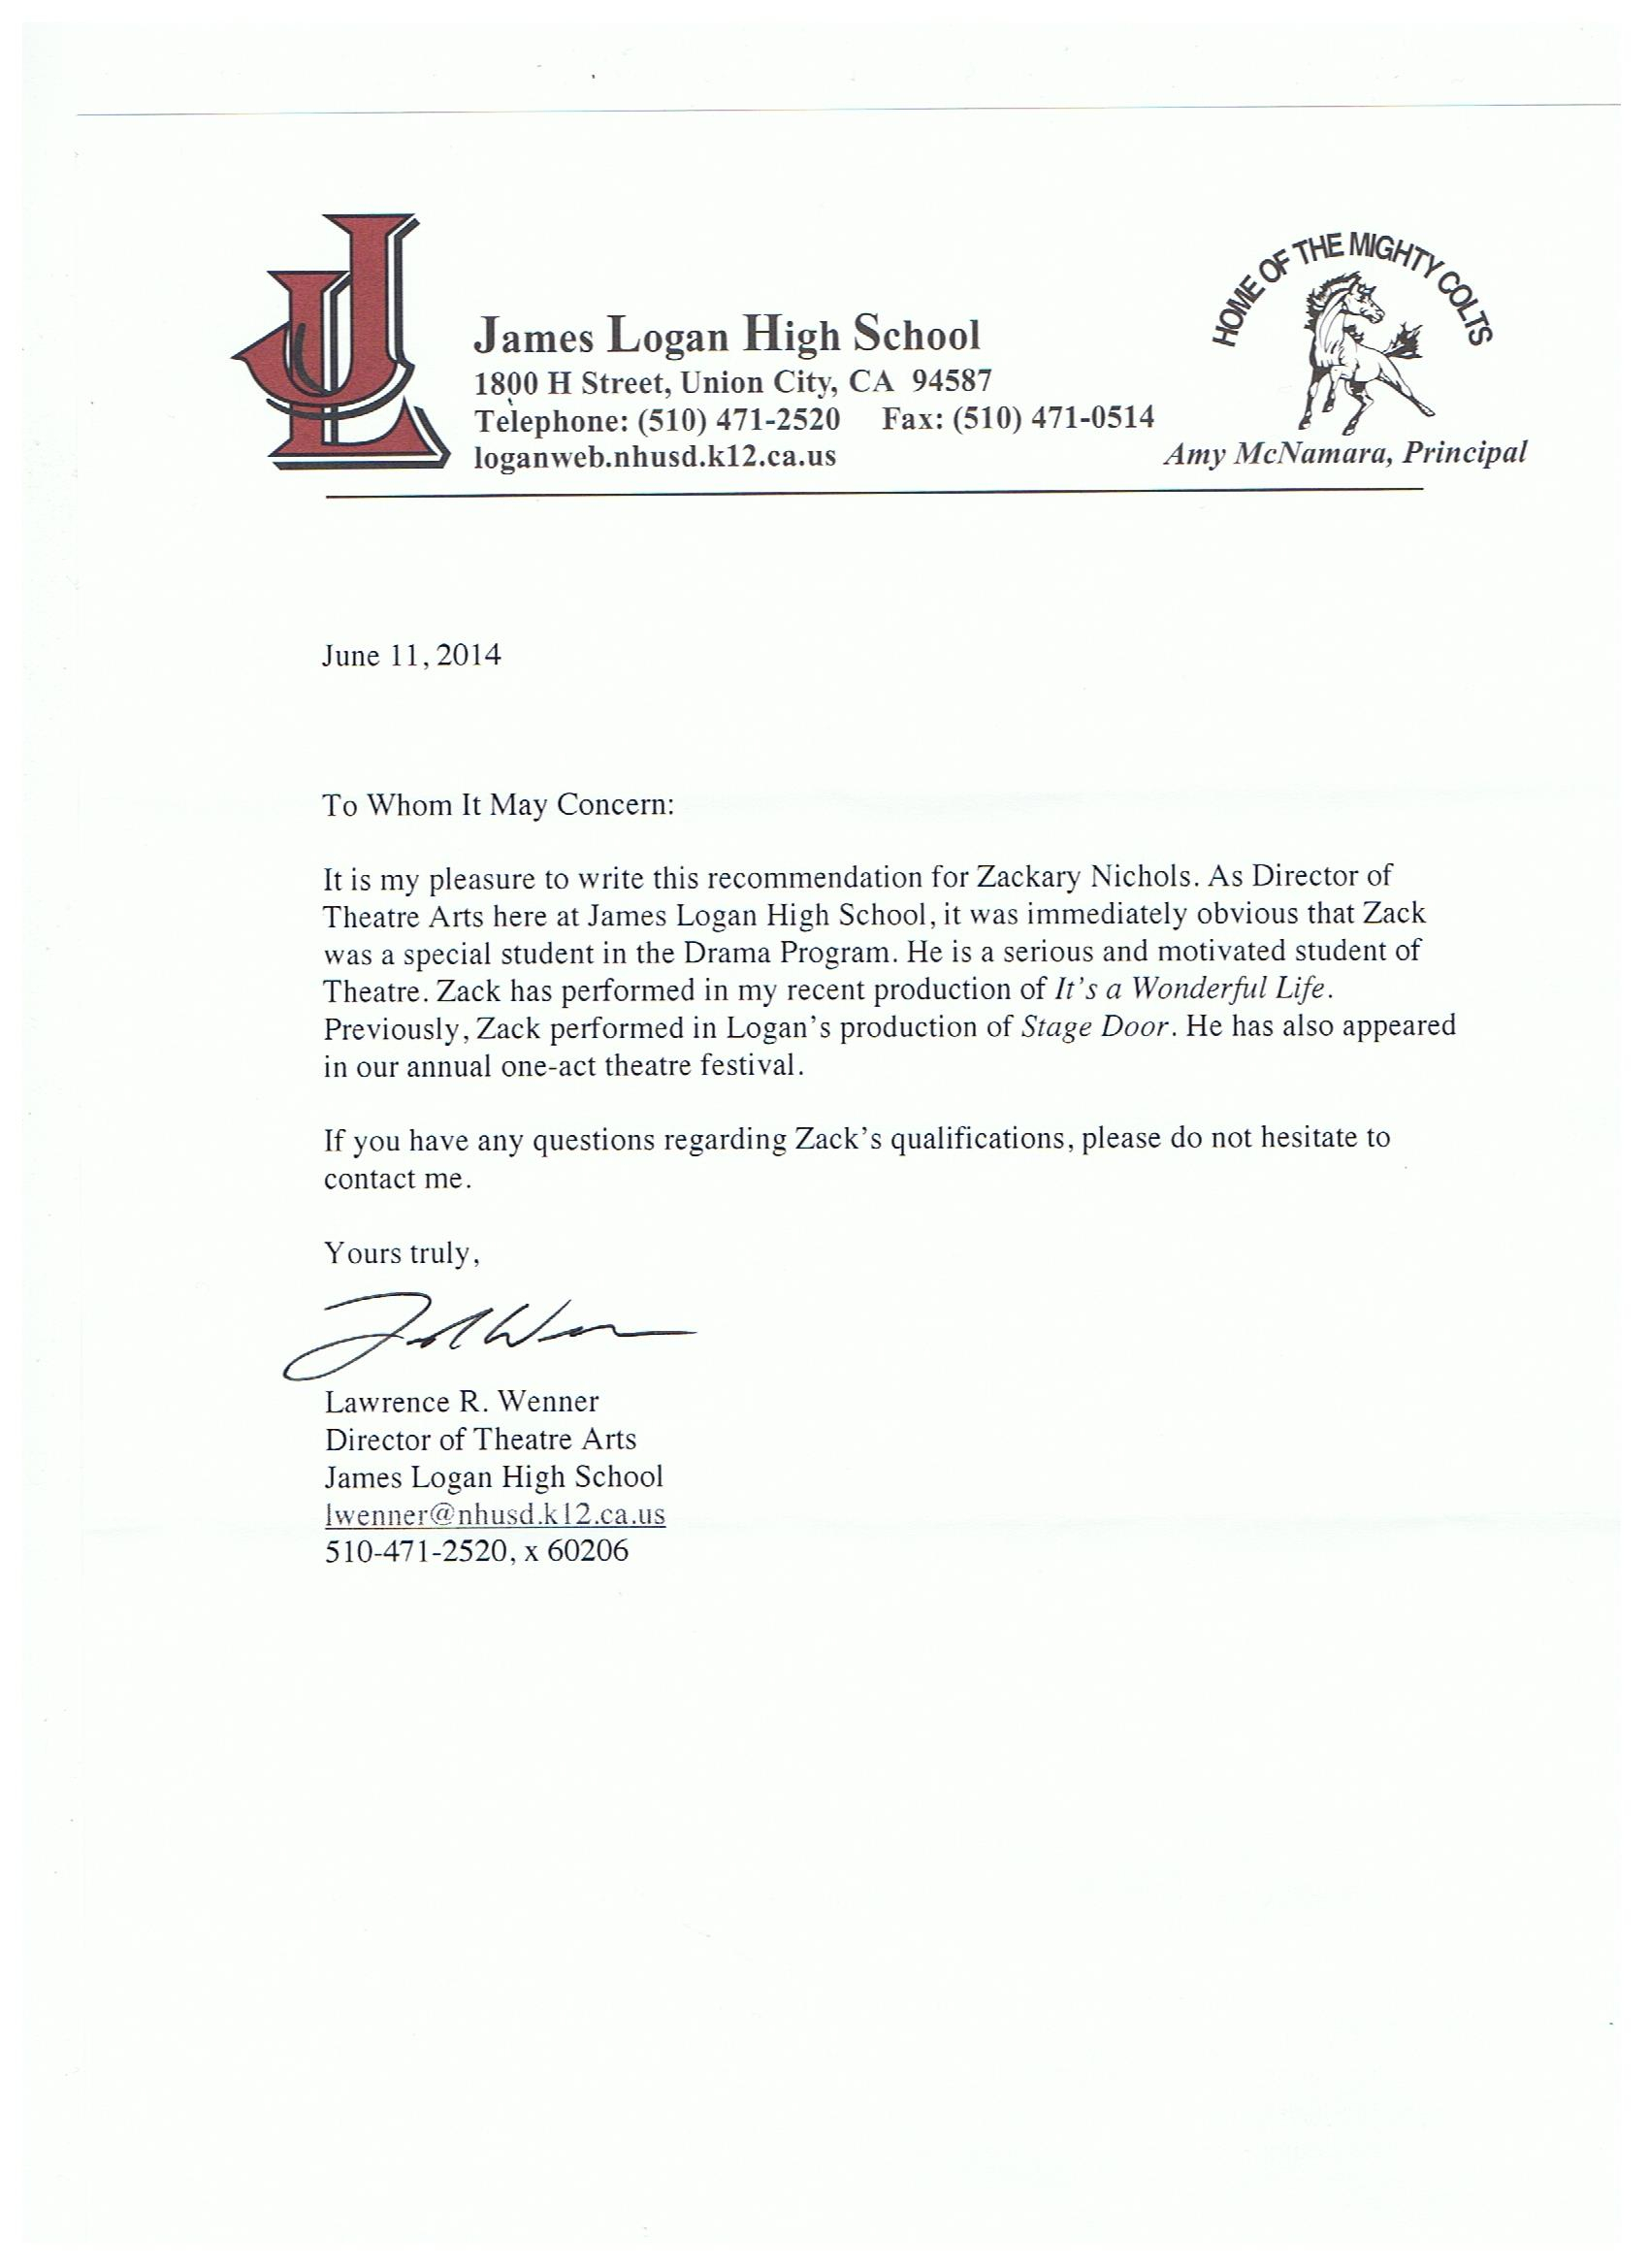 Letter Of Recommendation Theatre Teacher Lawrence Wenner intended for measurements 1700 X 2338